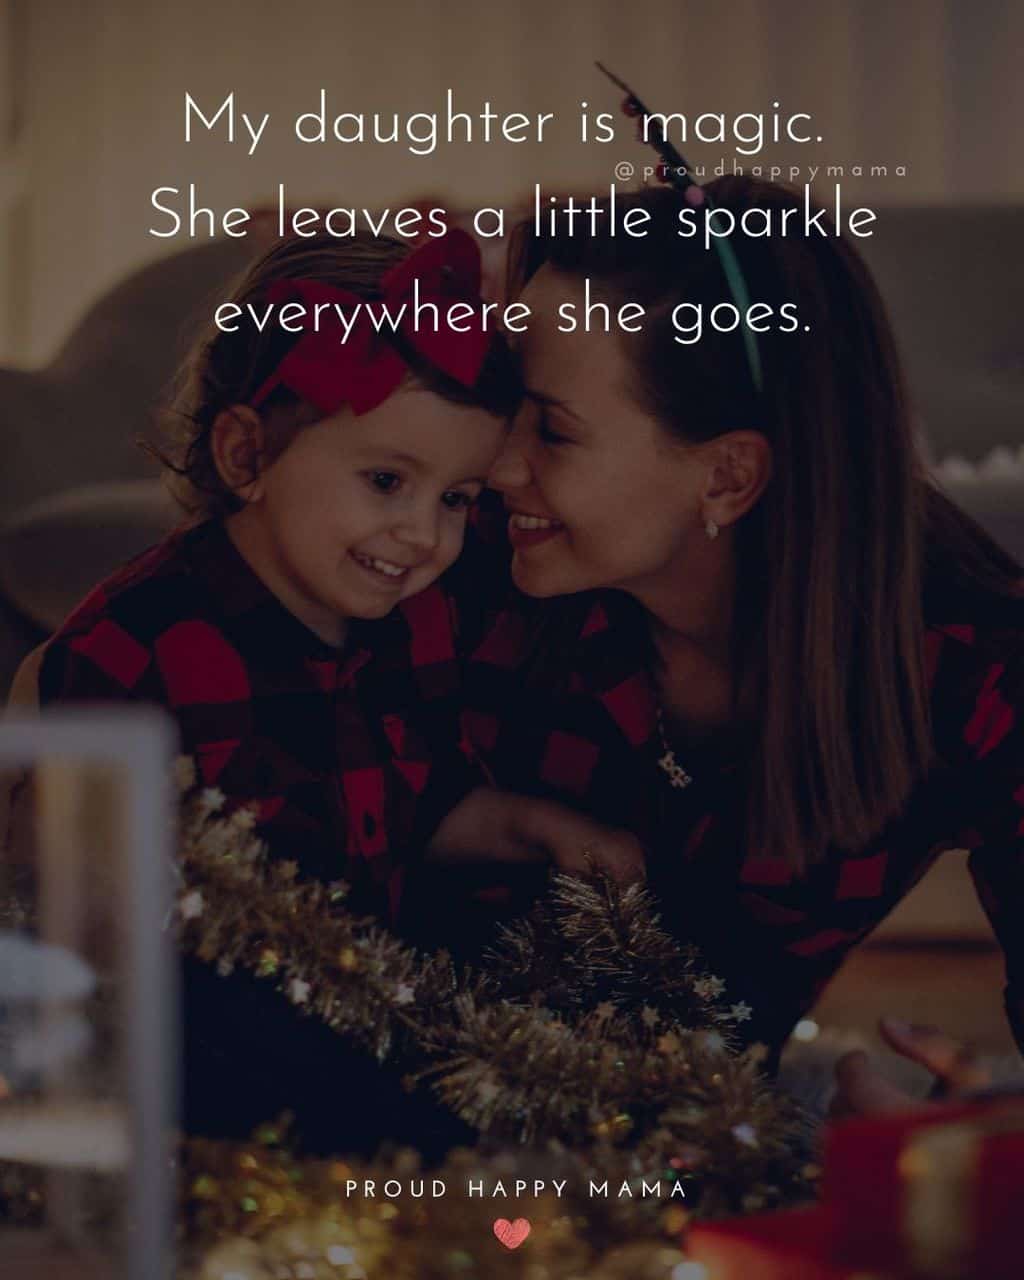 daughters are precious quotes - ‘My daughter is magic. She leaves a little sparkle everywhere she goes.’